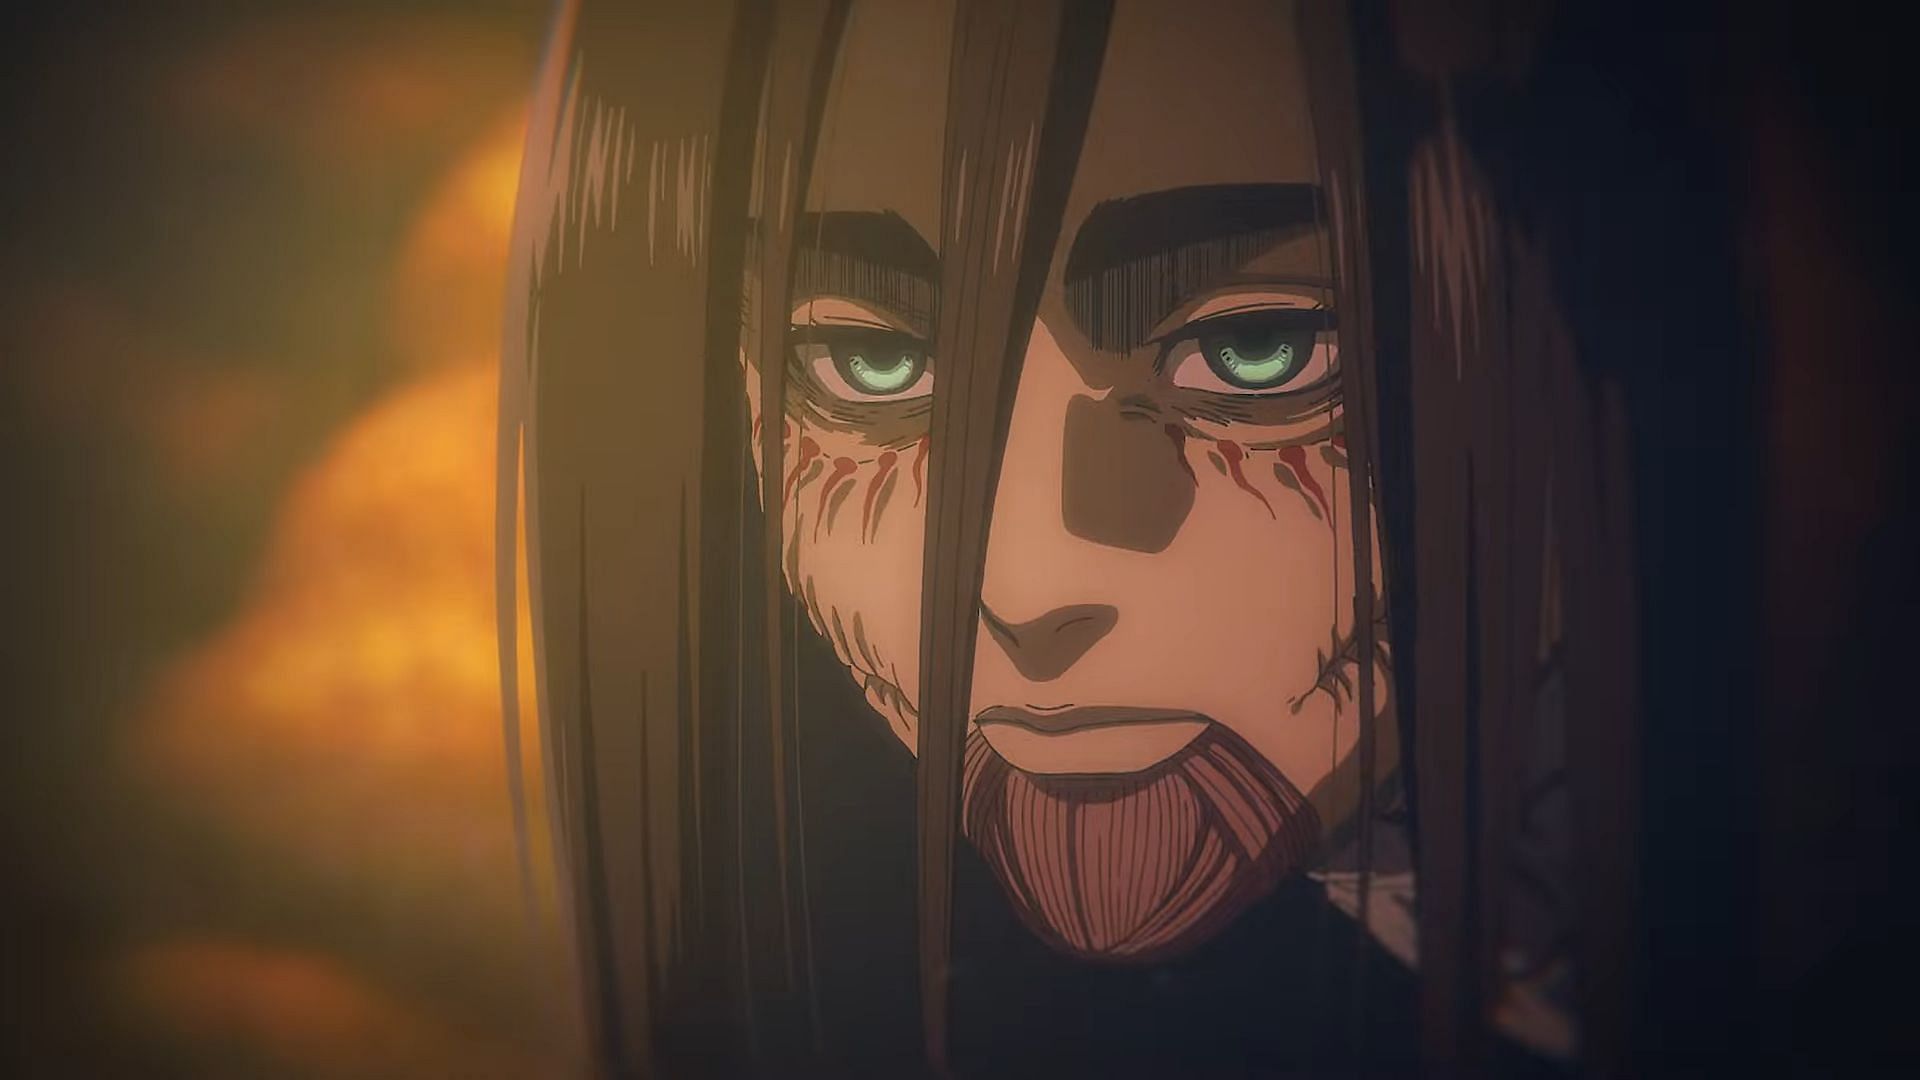 Attack on Titan' should be your next watch, regardless if you are an anime  fan